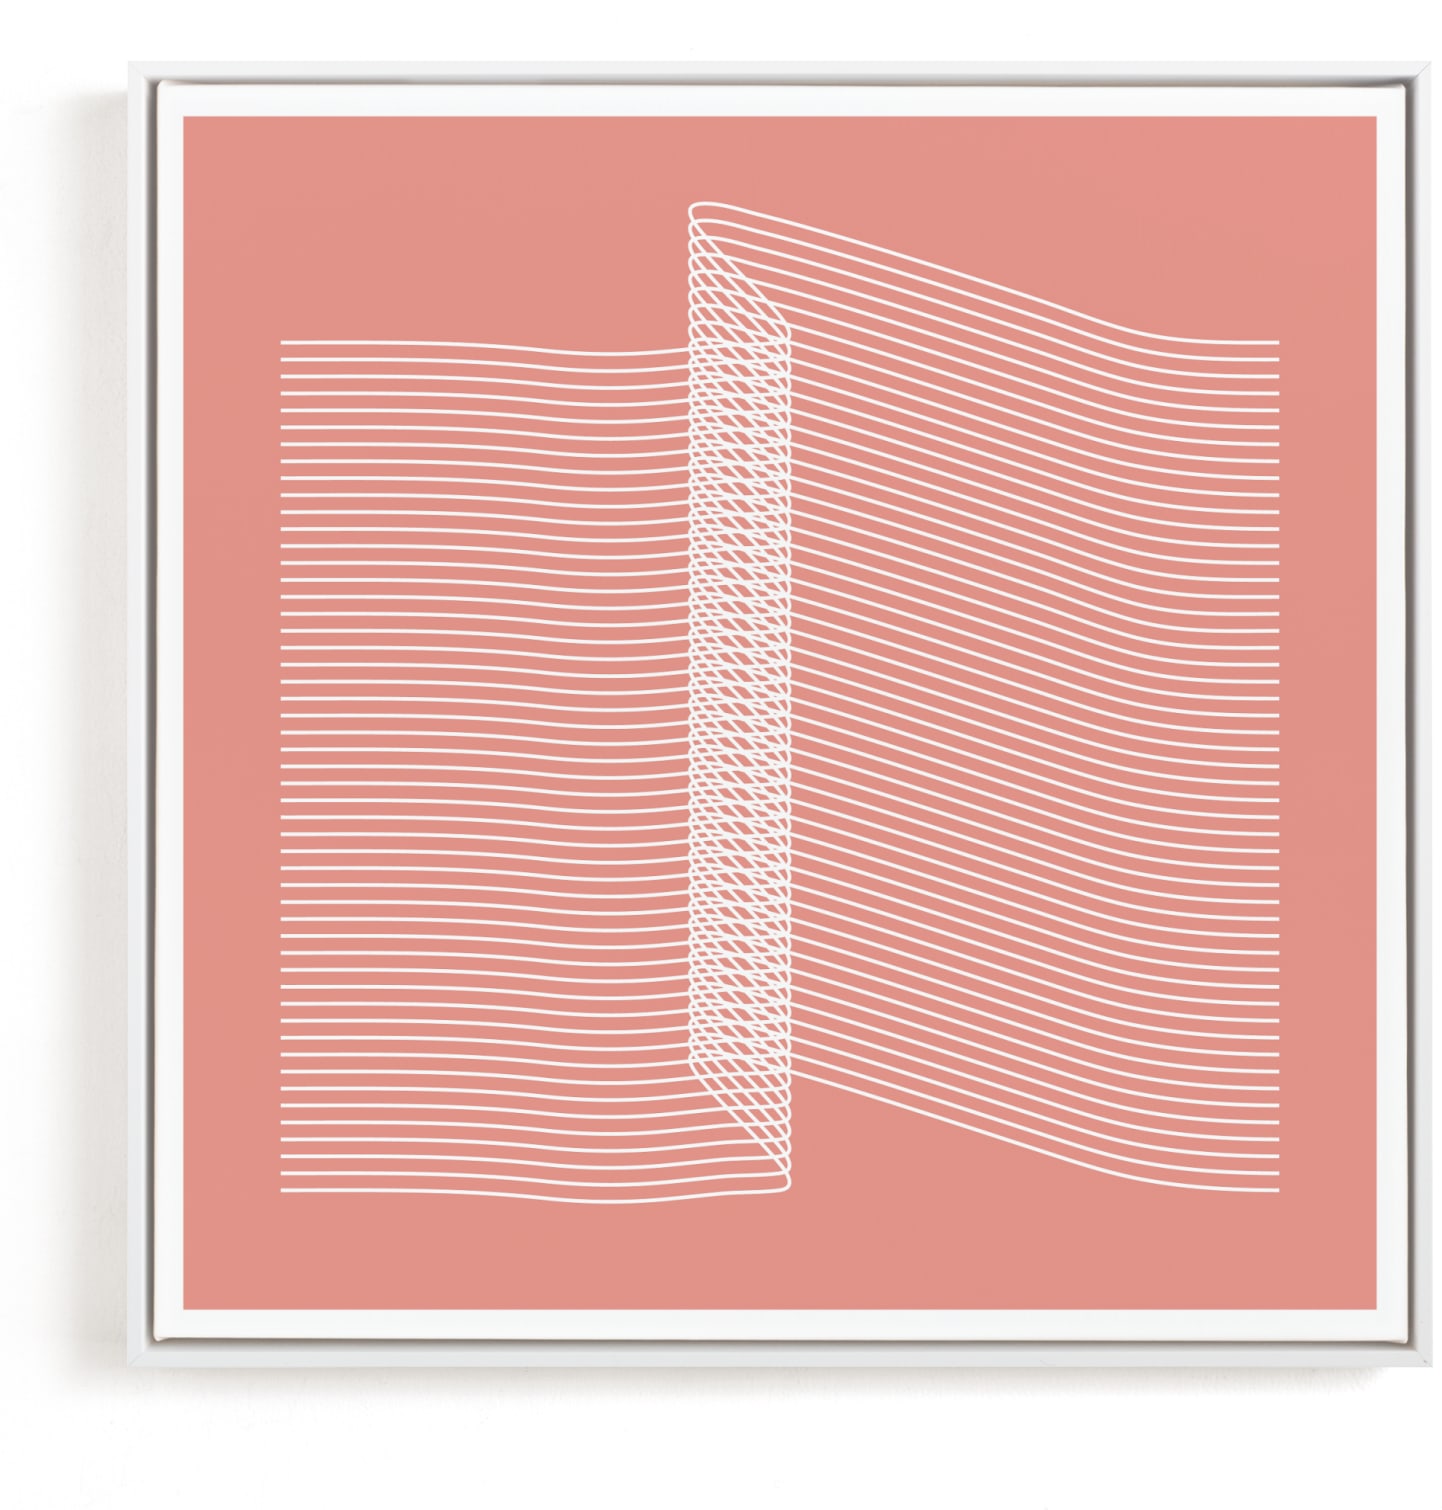 This is a white art by Marco Berrios called Pink and Lines rigth.